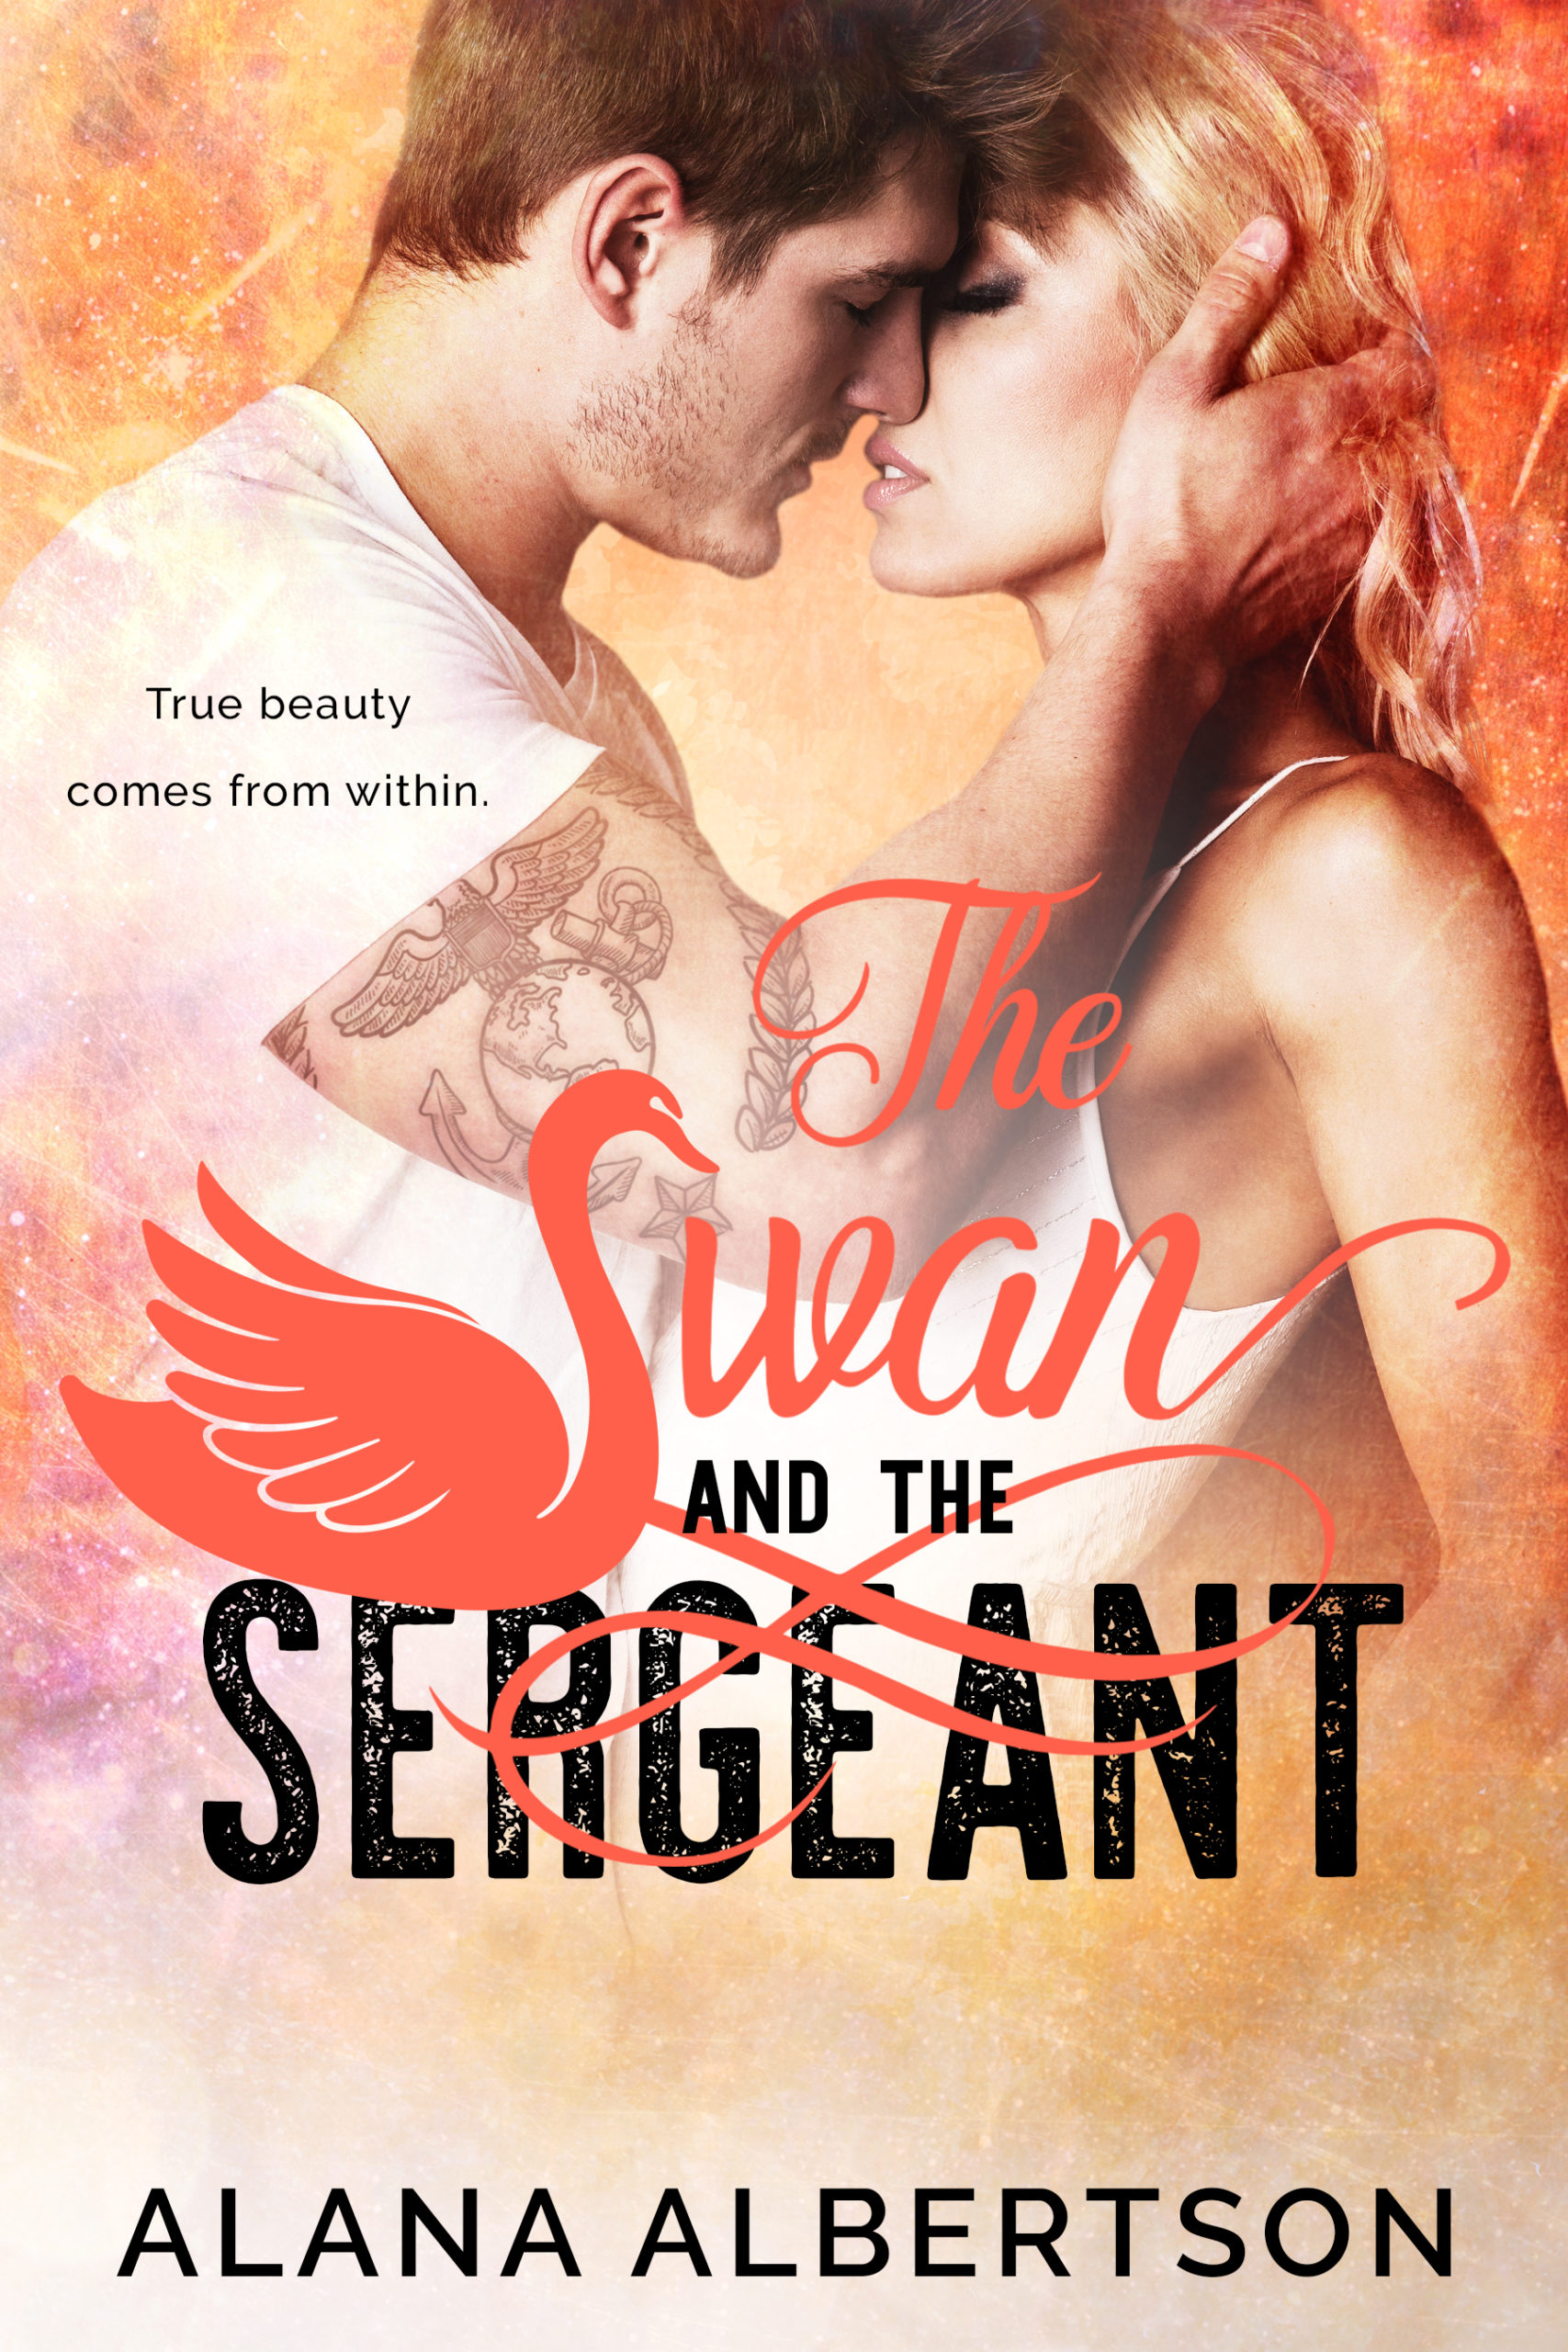 The Swan and The Sergeant Release!